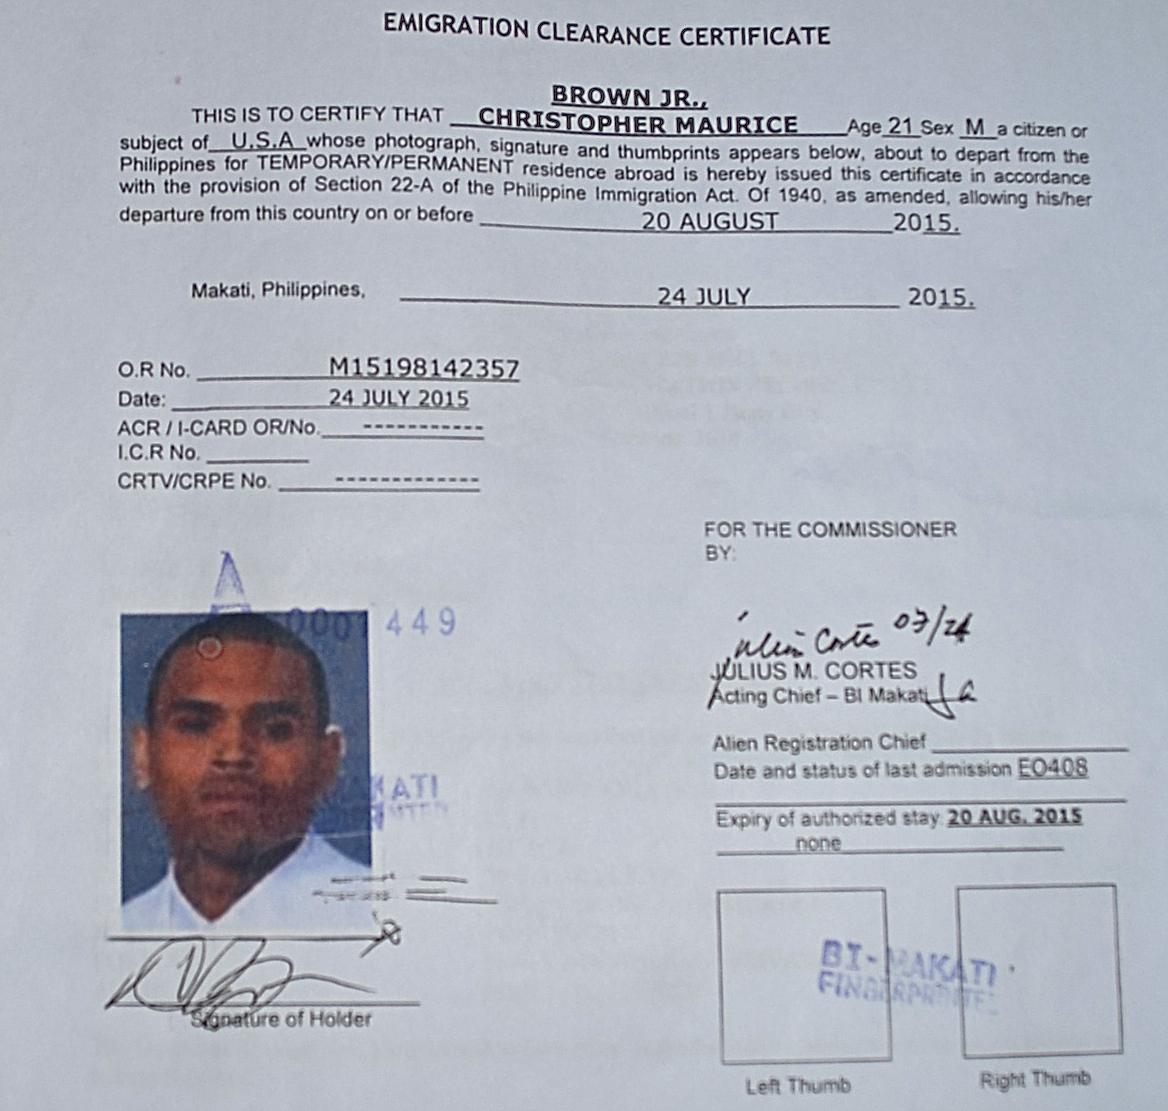 Chris Brown Emigration Clearance Certificate